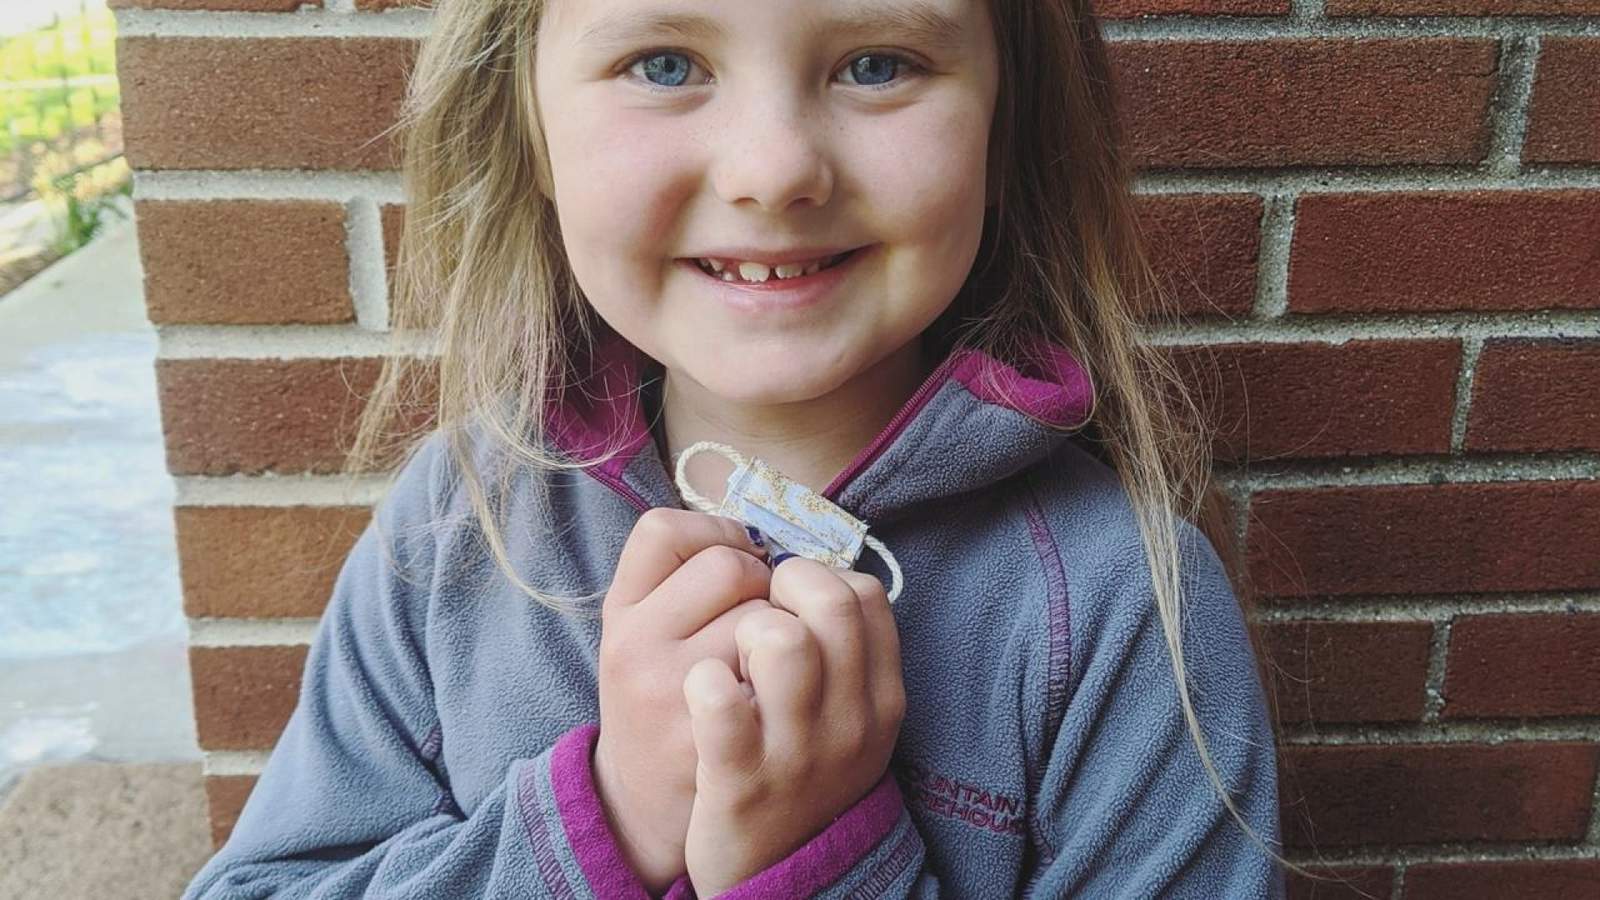 7-year-old girl crafts tiny face mask for the Tooth Fairy